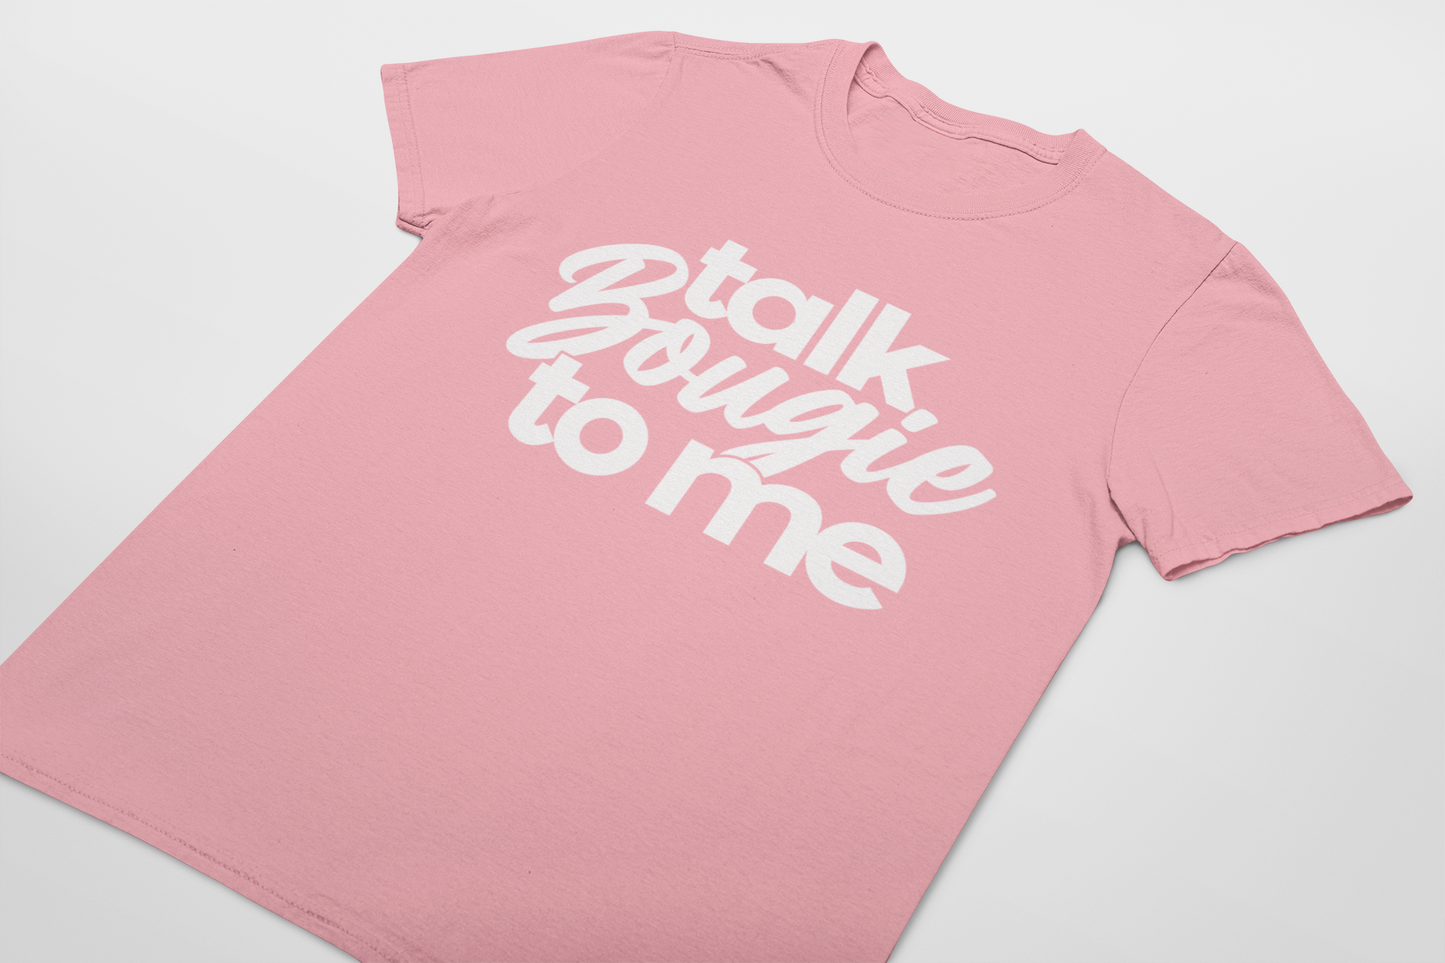 talk Bougie to me T-shirt